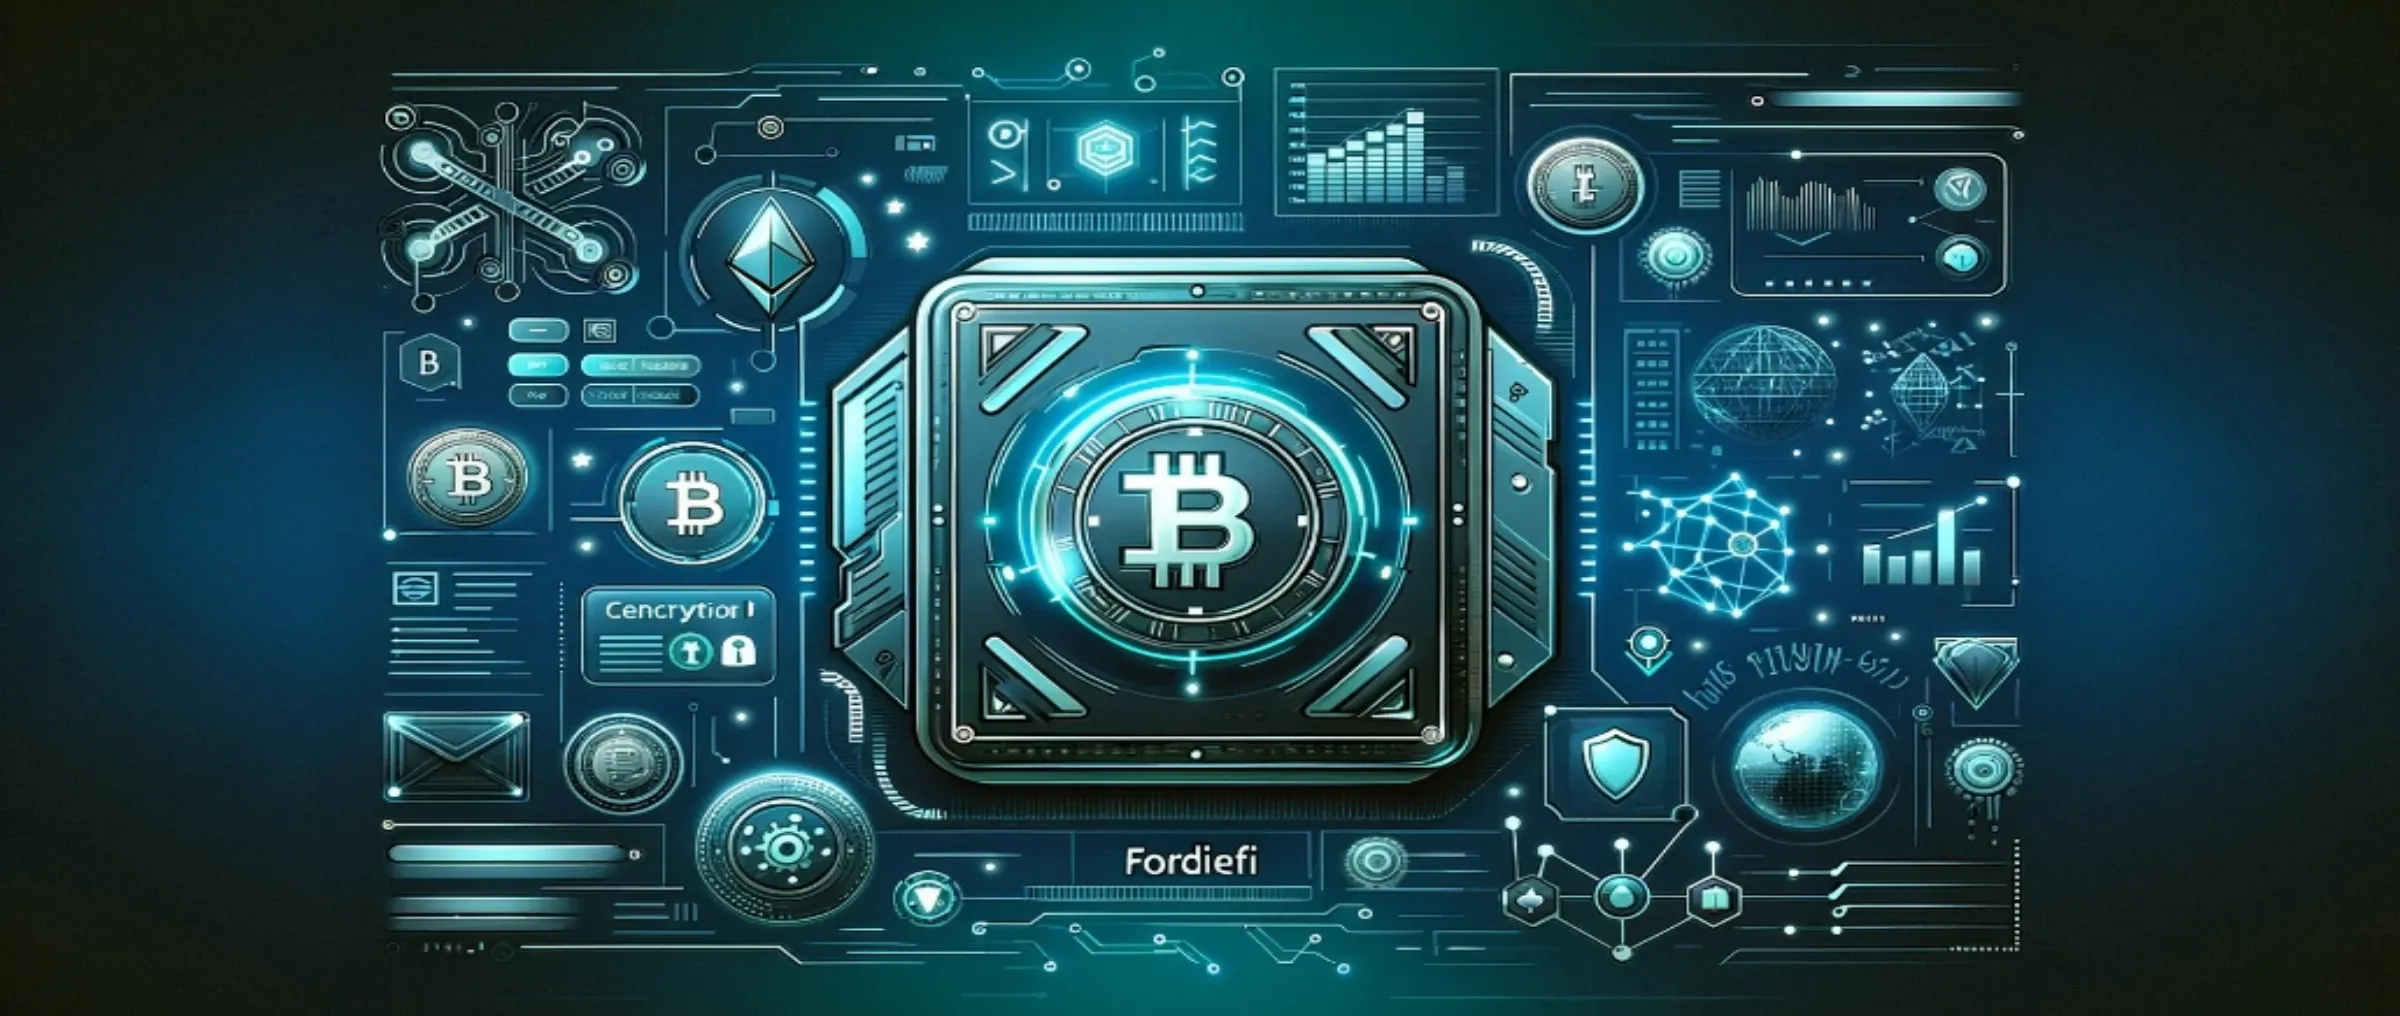 Fordefi has Attracted $10 million Investment in its crypto wallet